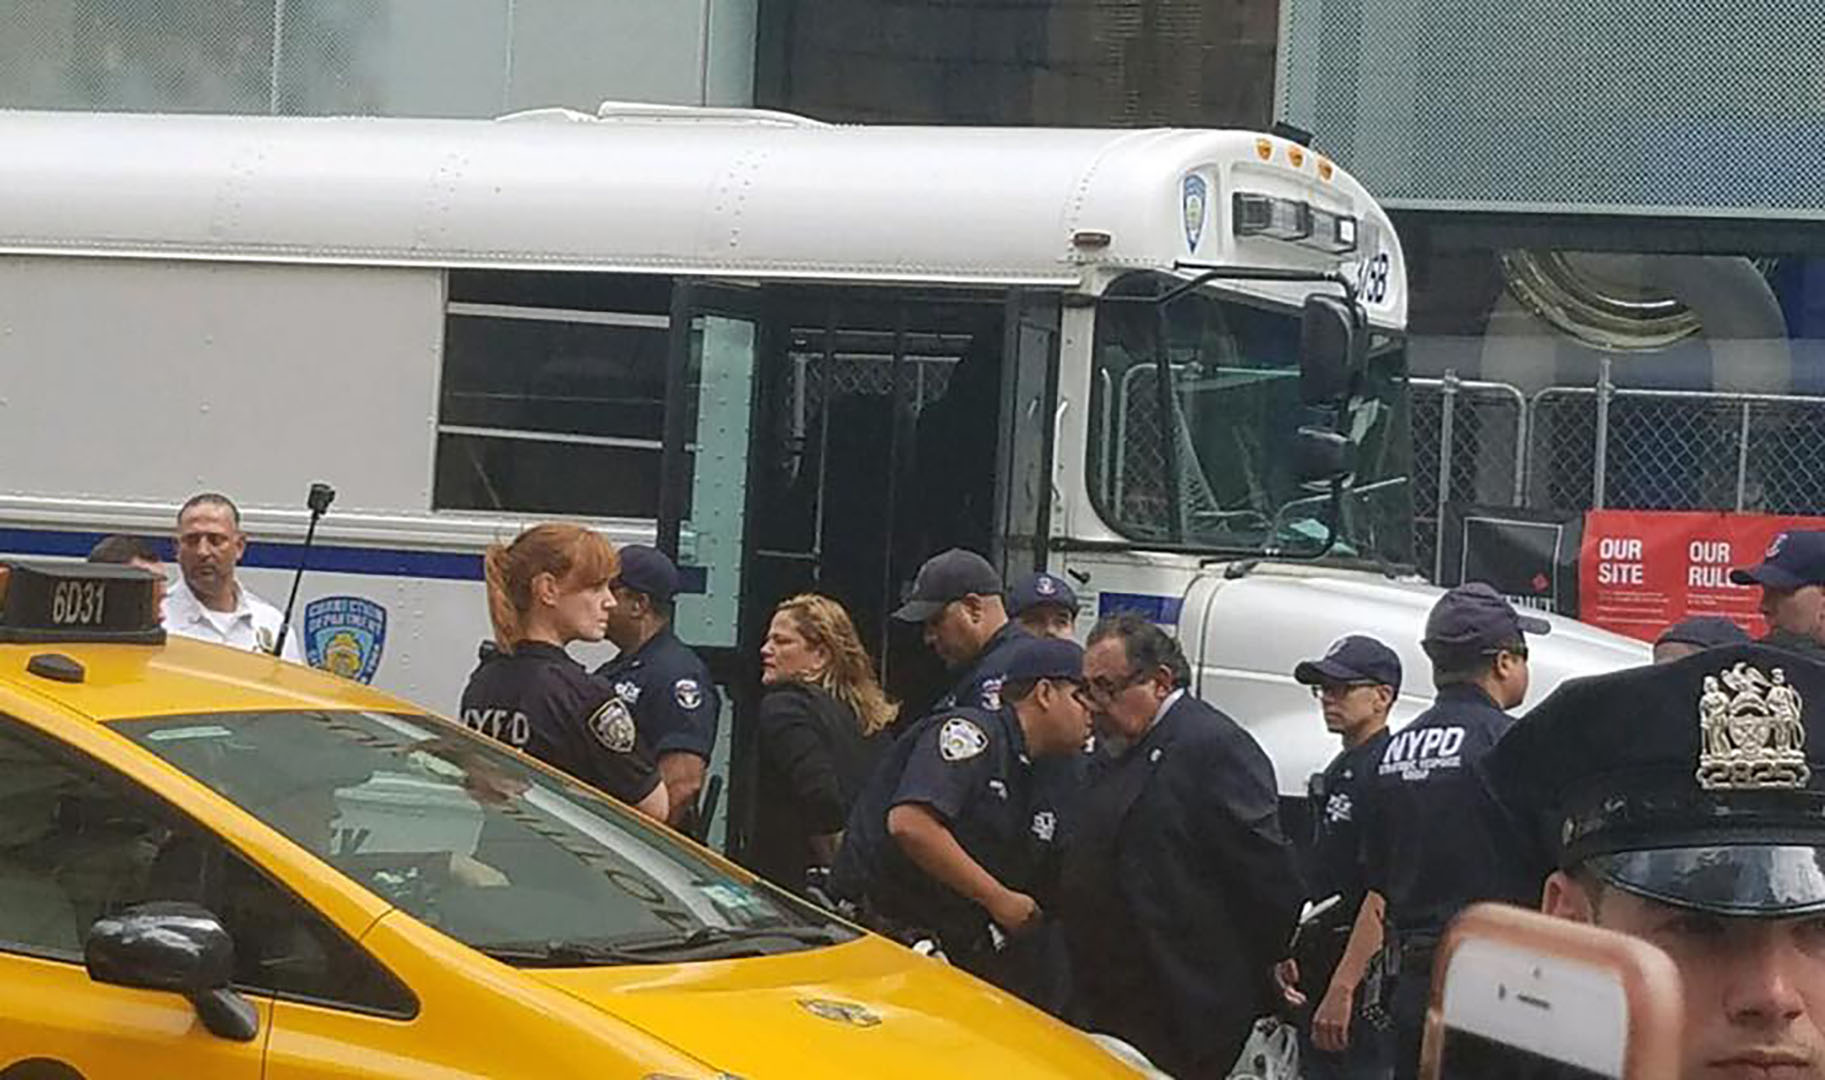 U.S. Rep. Raúl Grijalva is arrested outside of Trump Tower in New York City Sept. 19, 2017. Several members of congress were protesting the president's immigration policy.